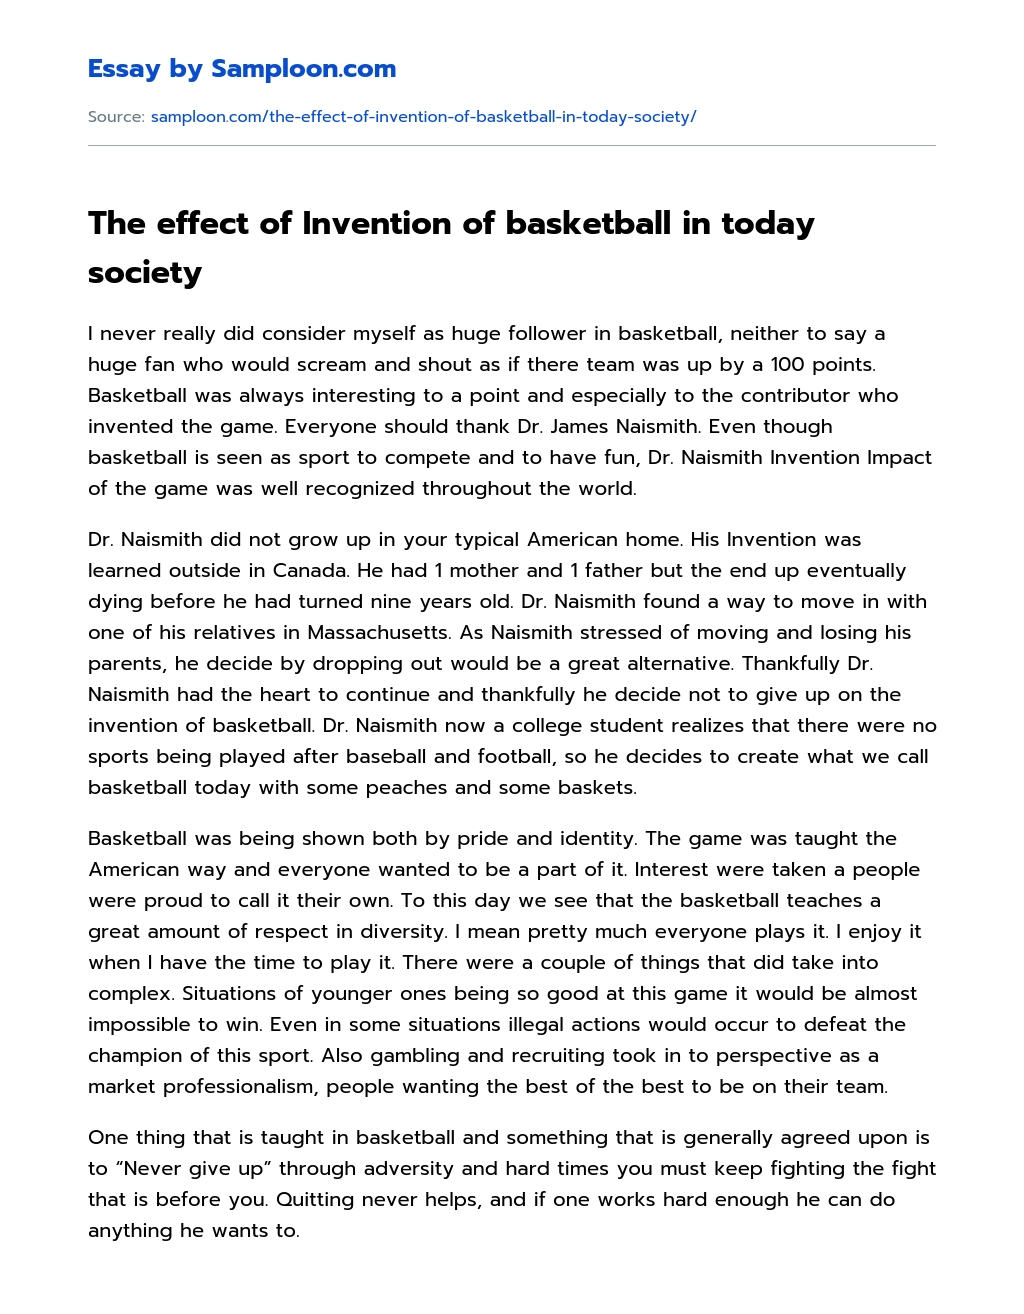 The effect of Invention of basketball in today society essay